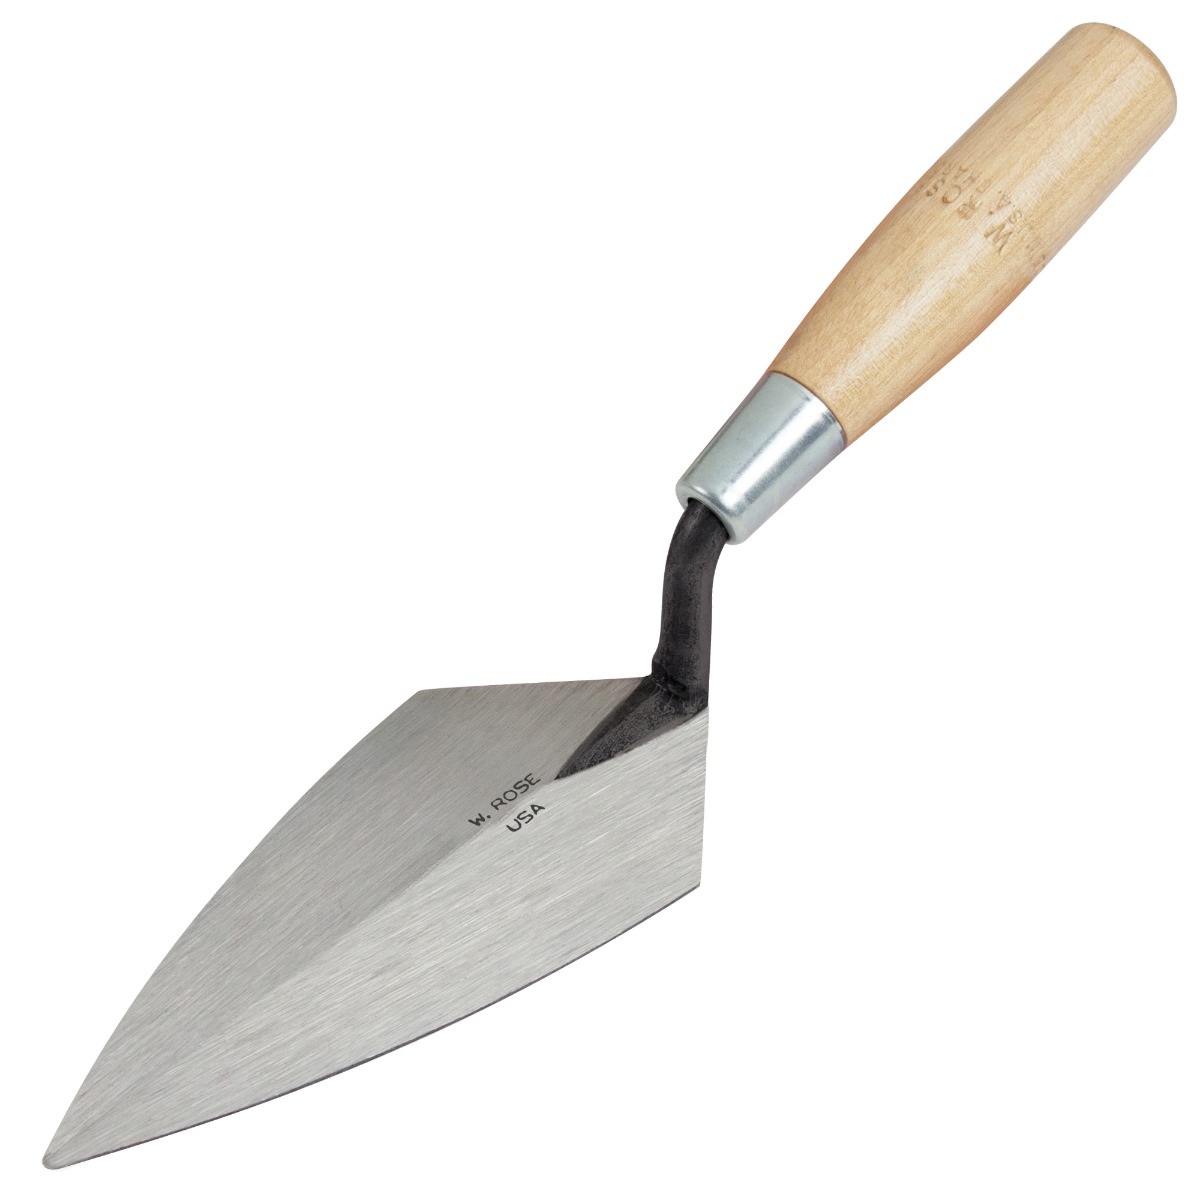 These W.Rose pointing trowels are available for professional bricklayers and archaeology enthusiasts. Each blade is forged from a single piece of carbon steel and heat tempered ready for a hand polished finish. Available from Speedcrete, United Kingdom.